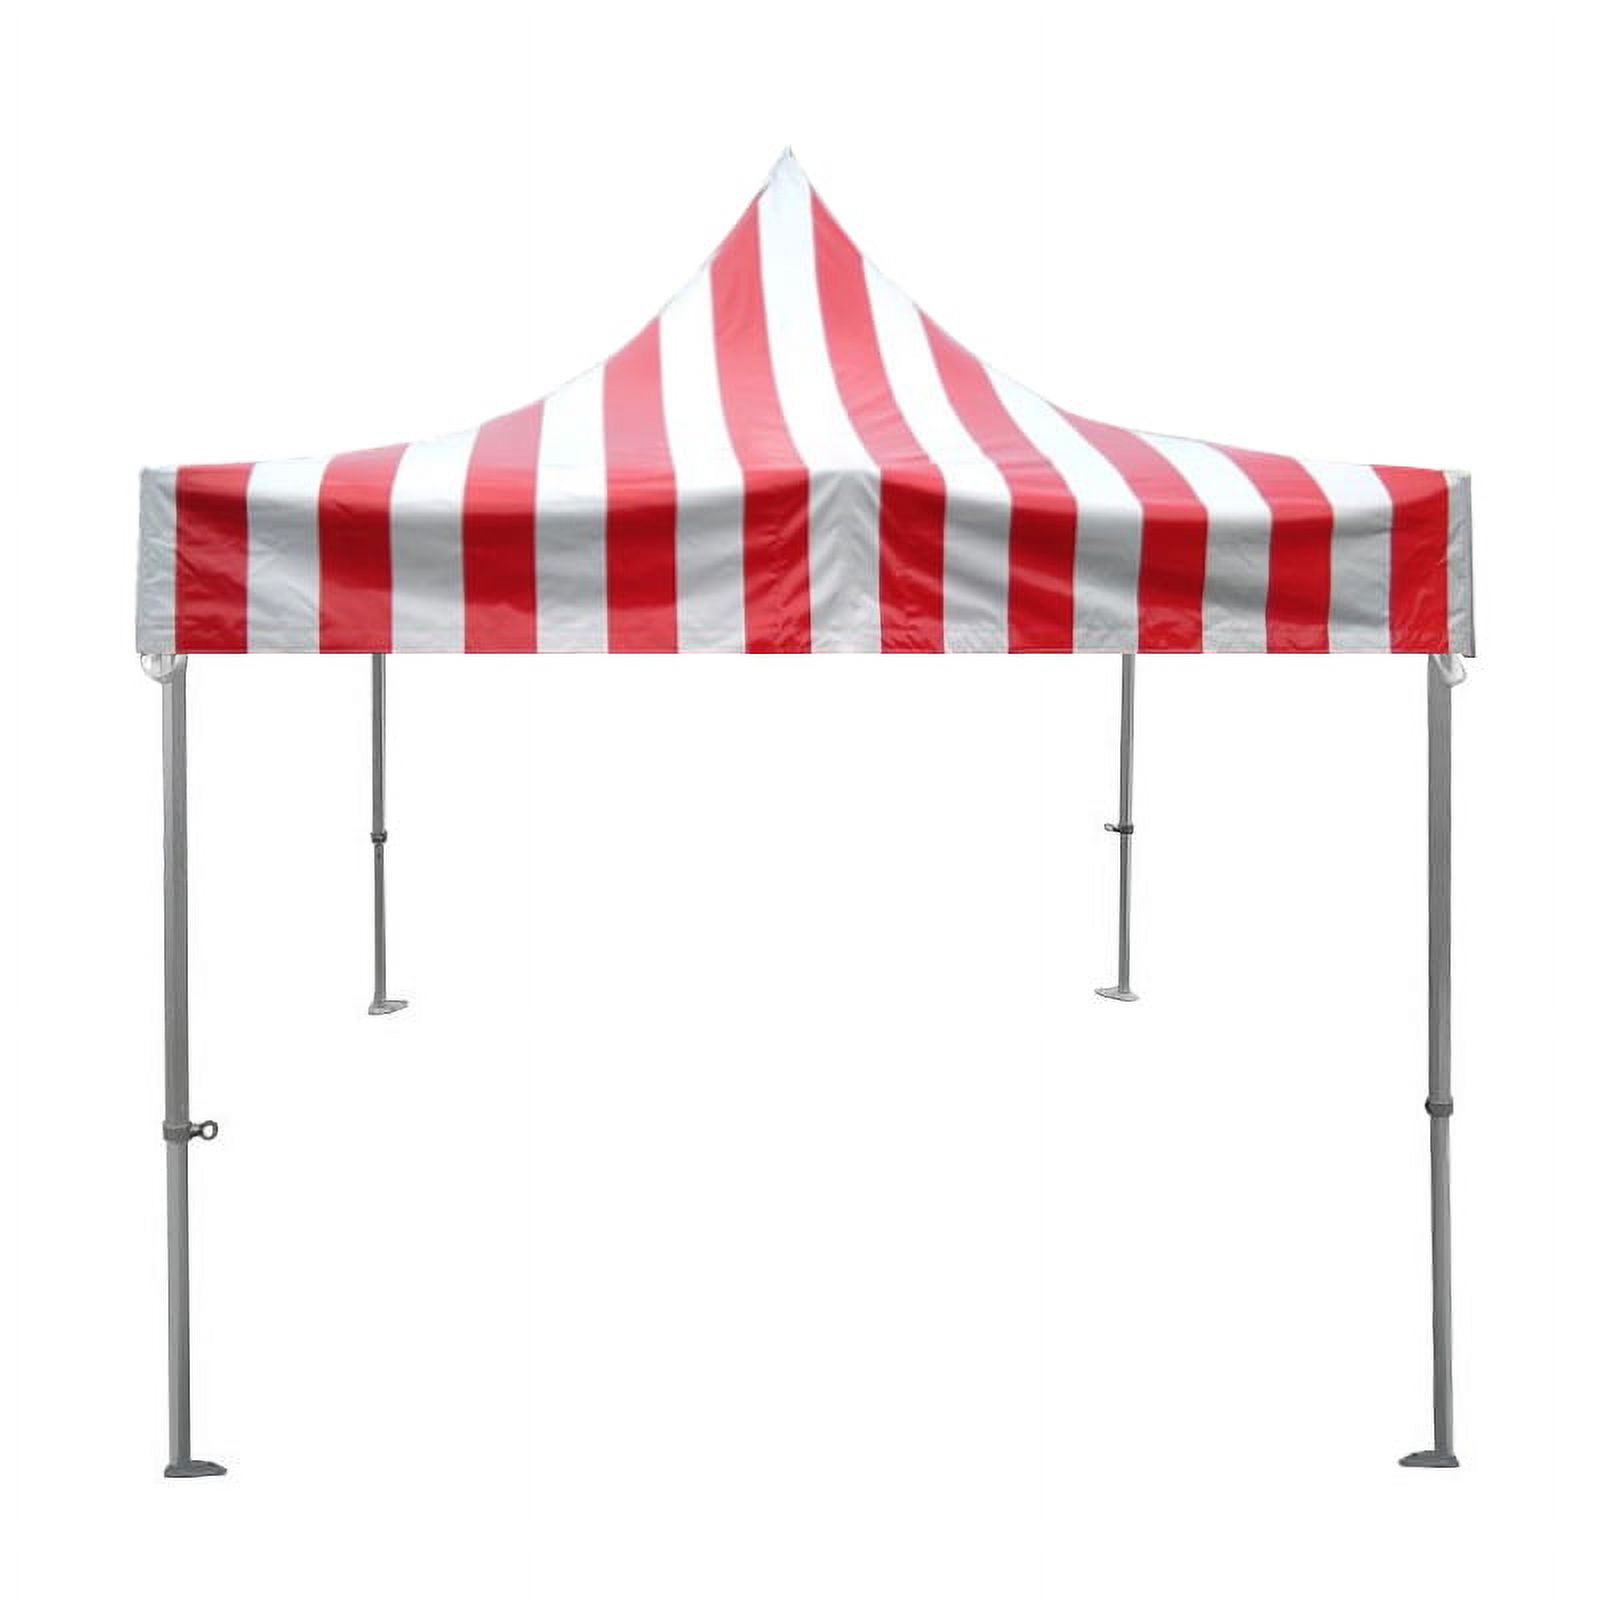 TentandTable Instant Beach Outdoor Canopy Pop Up Tent, Red and White Striped, 10 ft x 10 ft - image 1 of 7